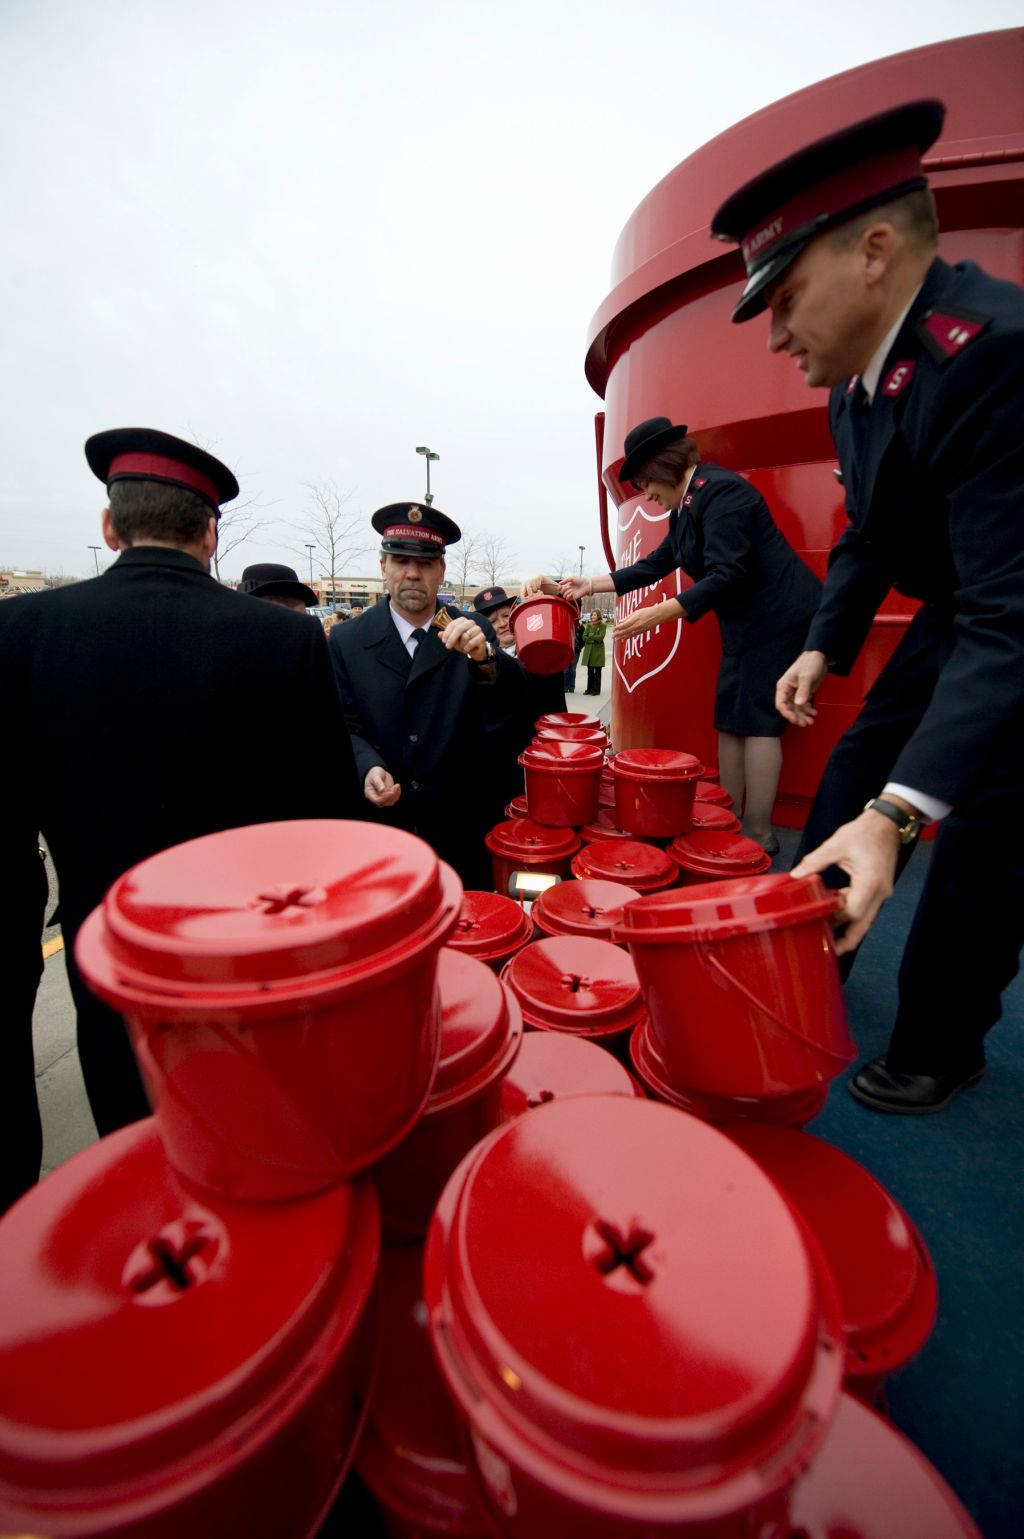 DAVID BREWSTER ‚Ä¢ dbrewster@startribune.com Thursday_11/12/09_St.Anthony ] The Salvation Army handed out the red kettles and hand bells at a kick-off ceremony for its annual holiday fund raiser.